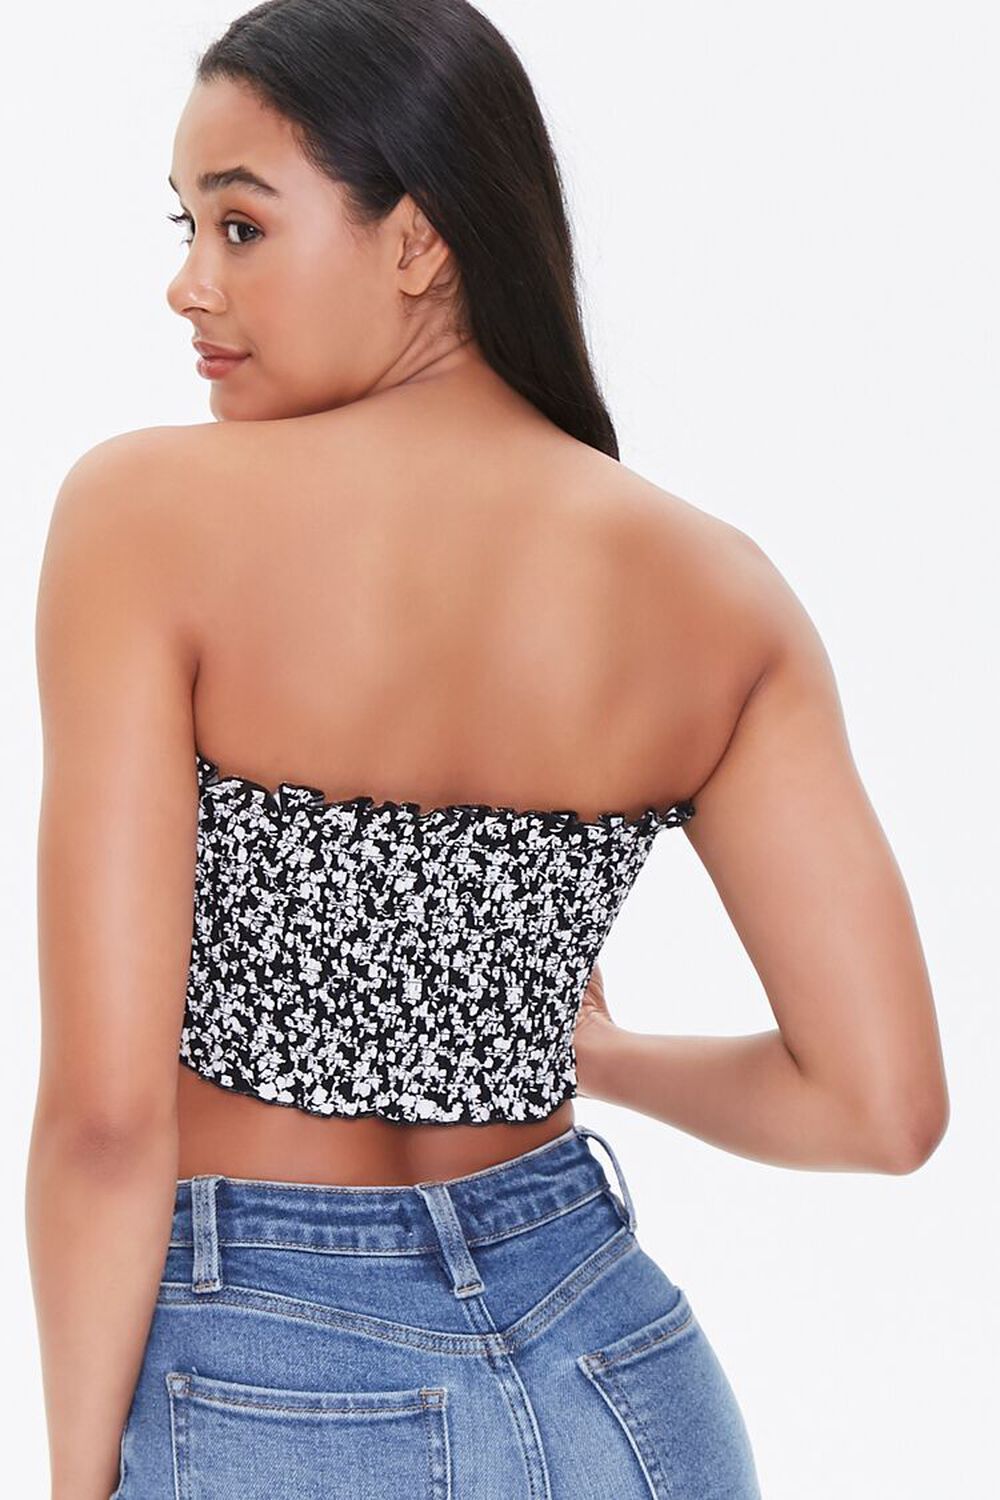 BLACK/WHITE Tie-Front Floral Tube Top, image 3